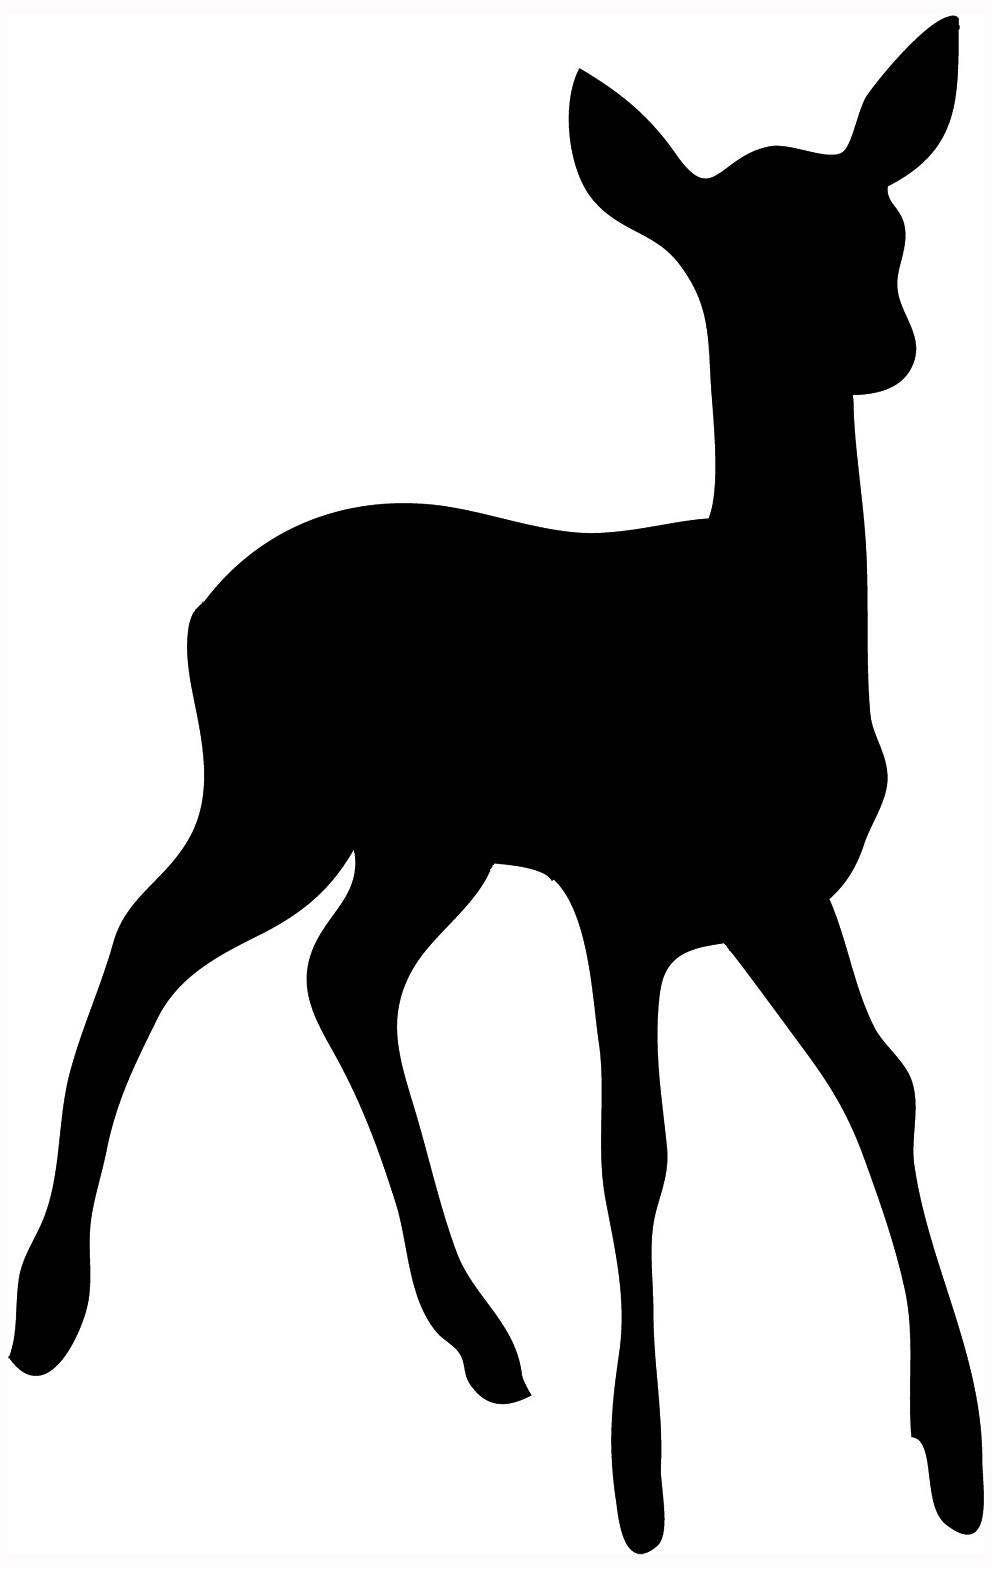 Deer Silhouette Clipart - Free Clip Art Images